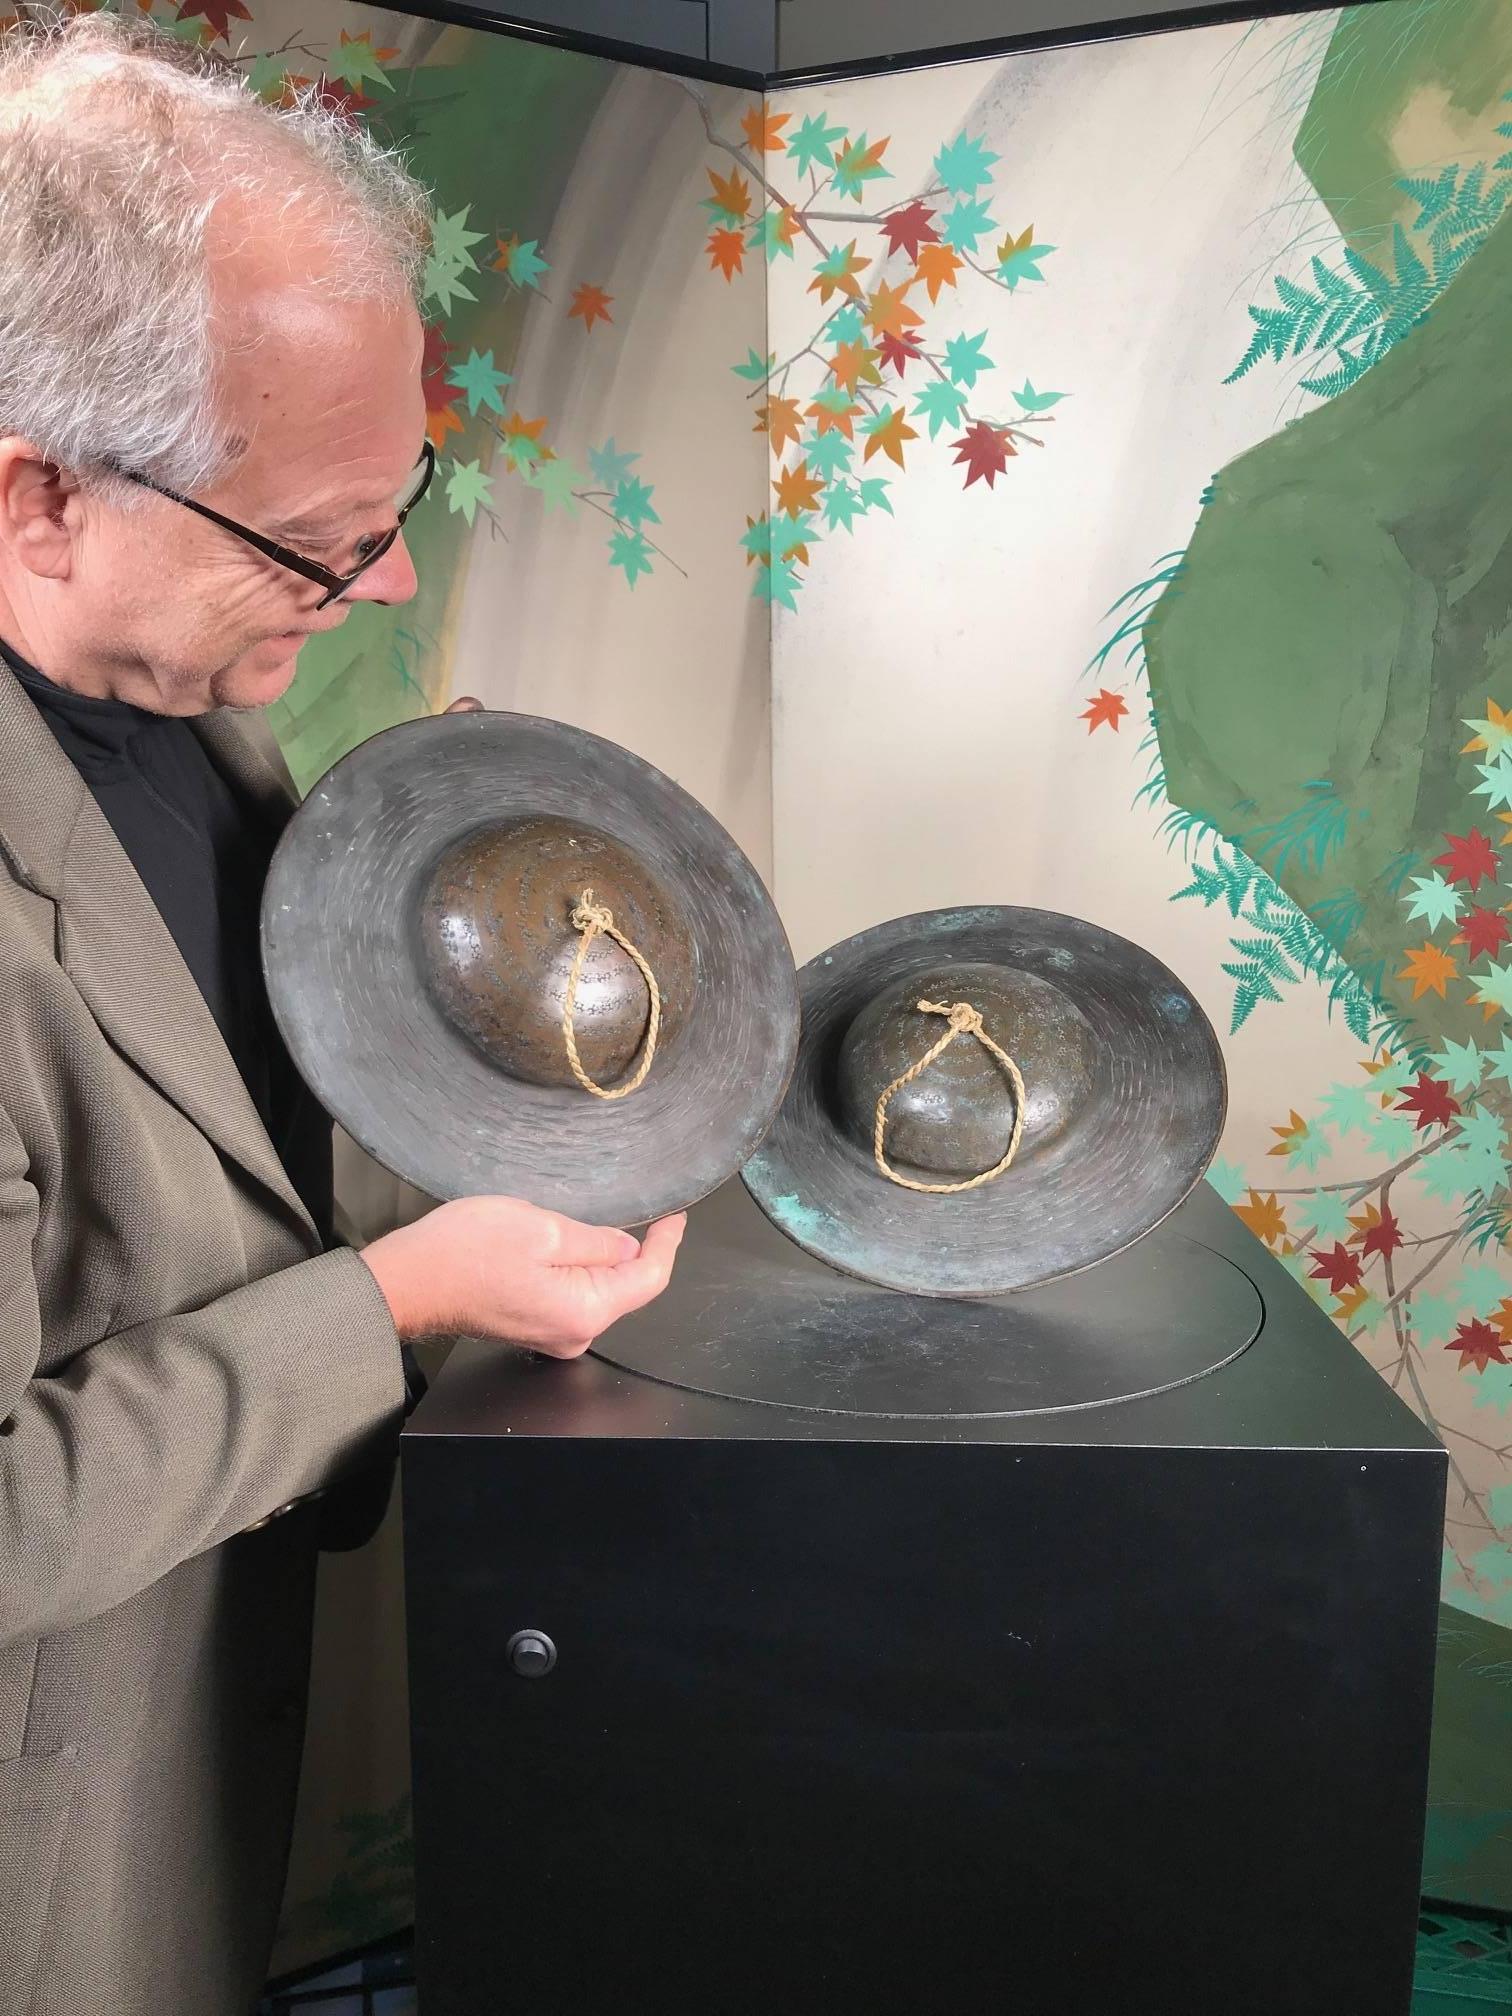  SALE - NOW SAVE 20% OR MORE

A fine pair of Japanese antique 19th century cymbals hand cast in solid bronze with fine scrolling details- examples that have been played no doubt with great inspiration. 

Fine condition with replacement rope handles